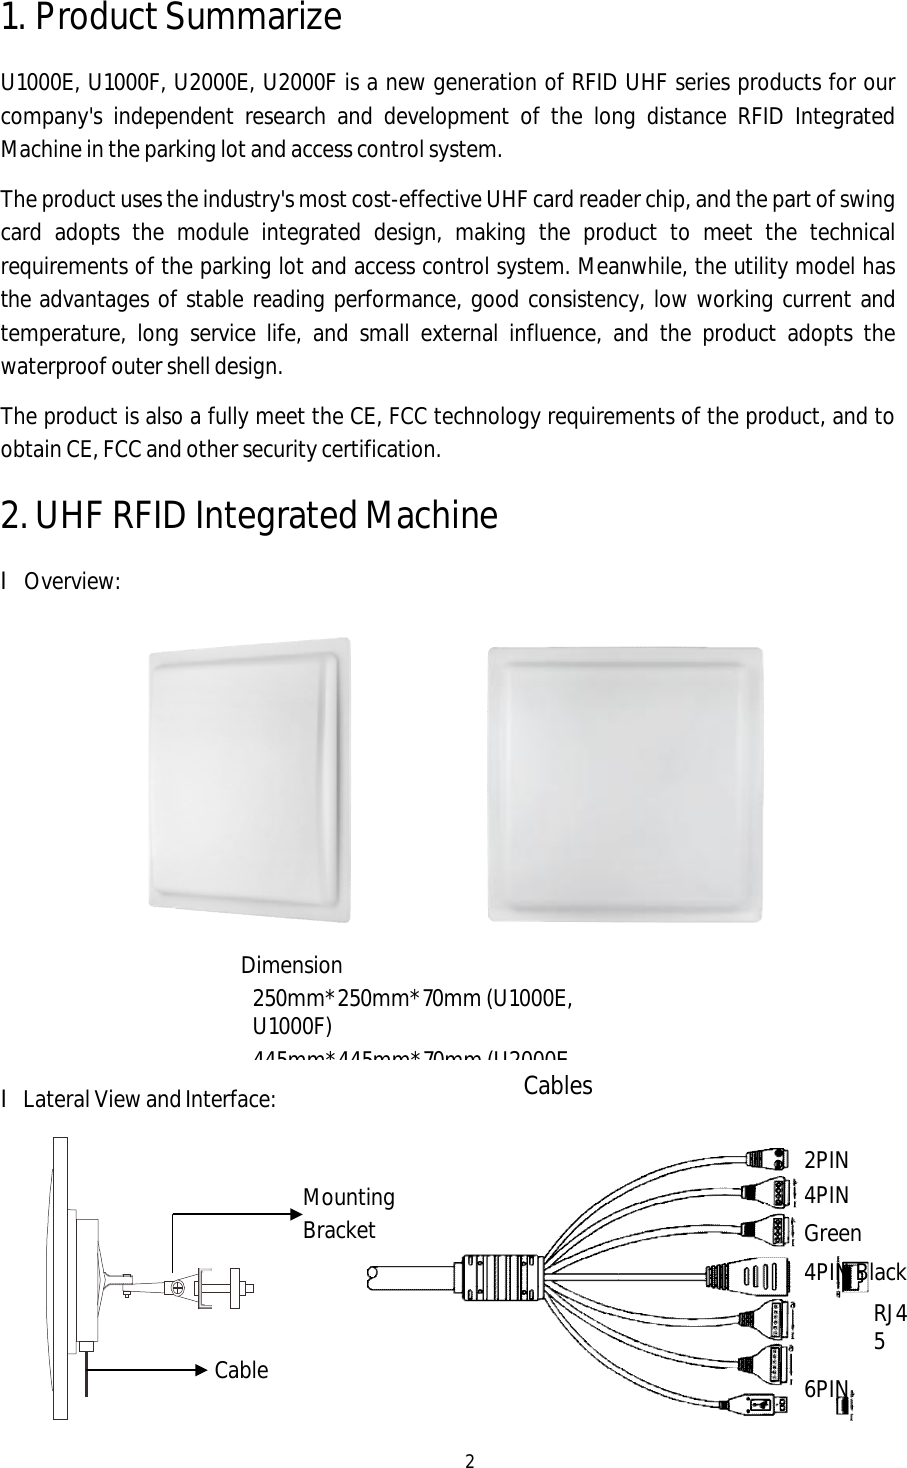 2 1. Product SummarizeU1000E, U1000F, U2000E, U2000F is a new generation of RFID UHF series products for our company&apos;s independent research and development of the long distance RFID Integrated Machine in the parking lot and access control system. The product uses the industry&apos;s most cost-effective UHF card reader chip, and the part of swing card adopts the module integrated design, making the product to meet the technical requirements of the parking lot and access control system. Meanwhile, the utility model has the advantages of stable reading performance, good consistency, low working current and temperature, long service life, and small external influence, and the product adopts the waterproof outer shell design. The product is also a fully meet the CE, FCC technology requirements of the product, and to obtain CE, FCC and other security certification. 2.UHF RFID Integrated MachinelOverview: lLateral View and Interface: Dimension 250mm*250mm*70mm (U1000E, U1000F) 445mm*445mm*70mm (U2000E, Mounting Bracket Cable2PIN 4PIN Green 4PIN Black RJ45 6PIN Cables 